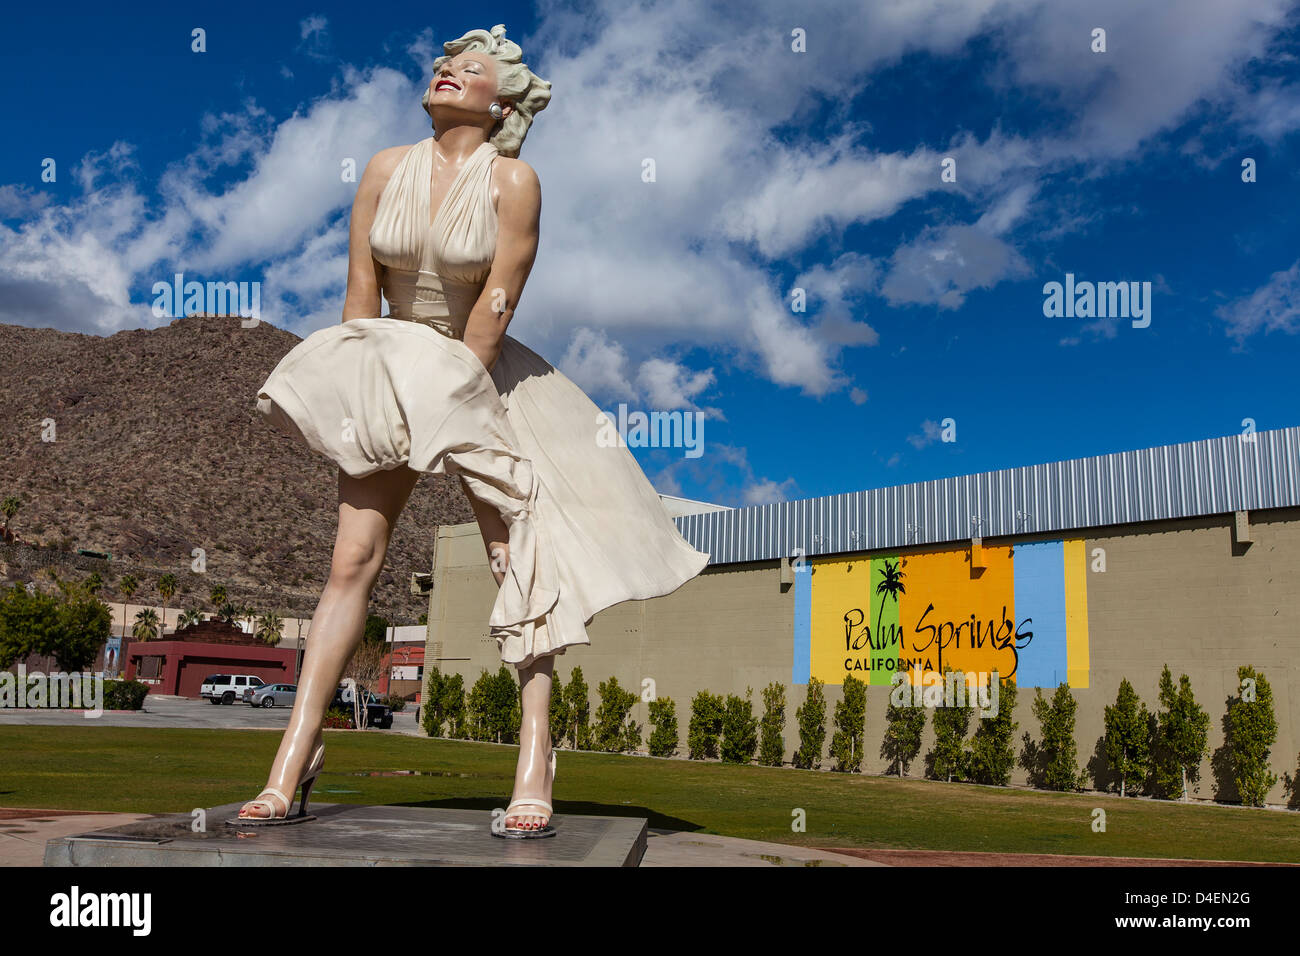 Getty Images Gallery - Marilyn Monroe at her home in Palm Springs,  California, during a photo shoot with Baron in 1954. Continuing our  #Modernismweek appreciation, our next Palm Springs stop is the